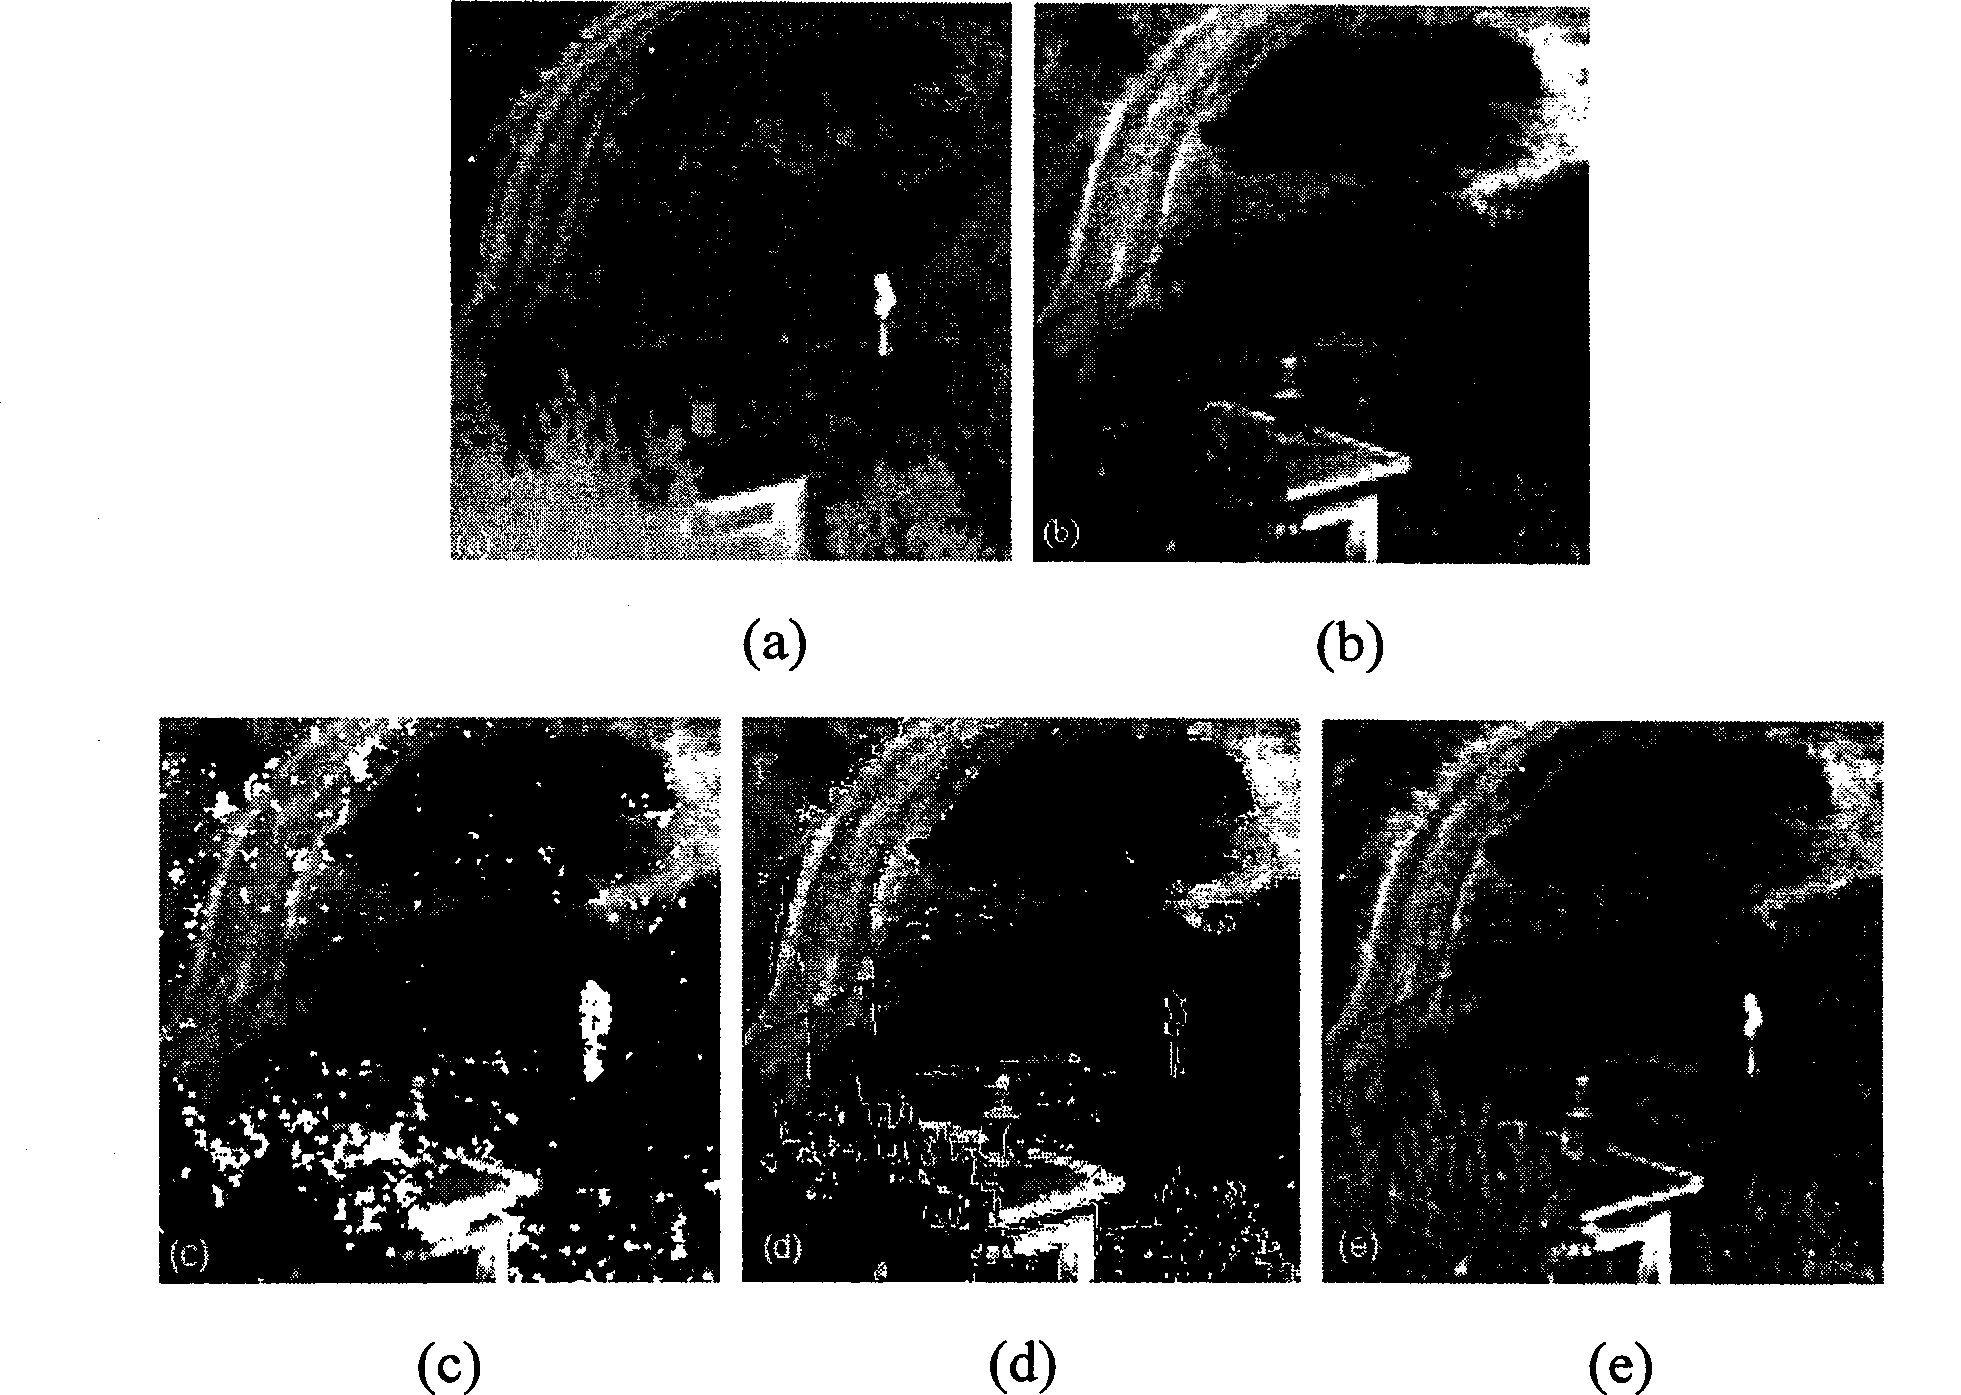 Image fusion of sequence infrared and visible light based on region segmentation